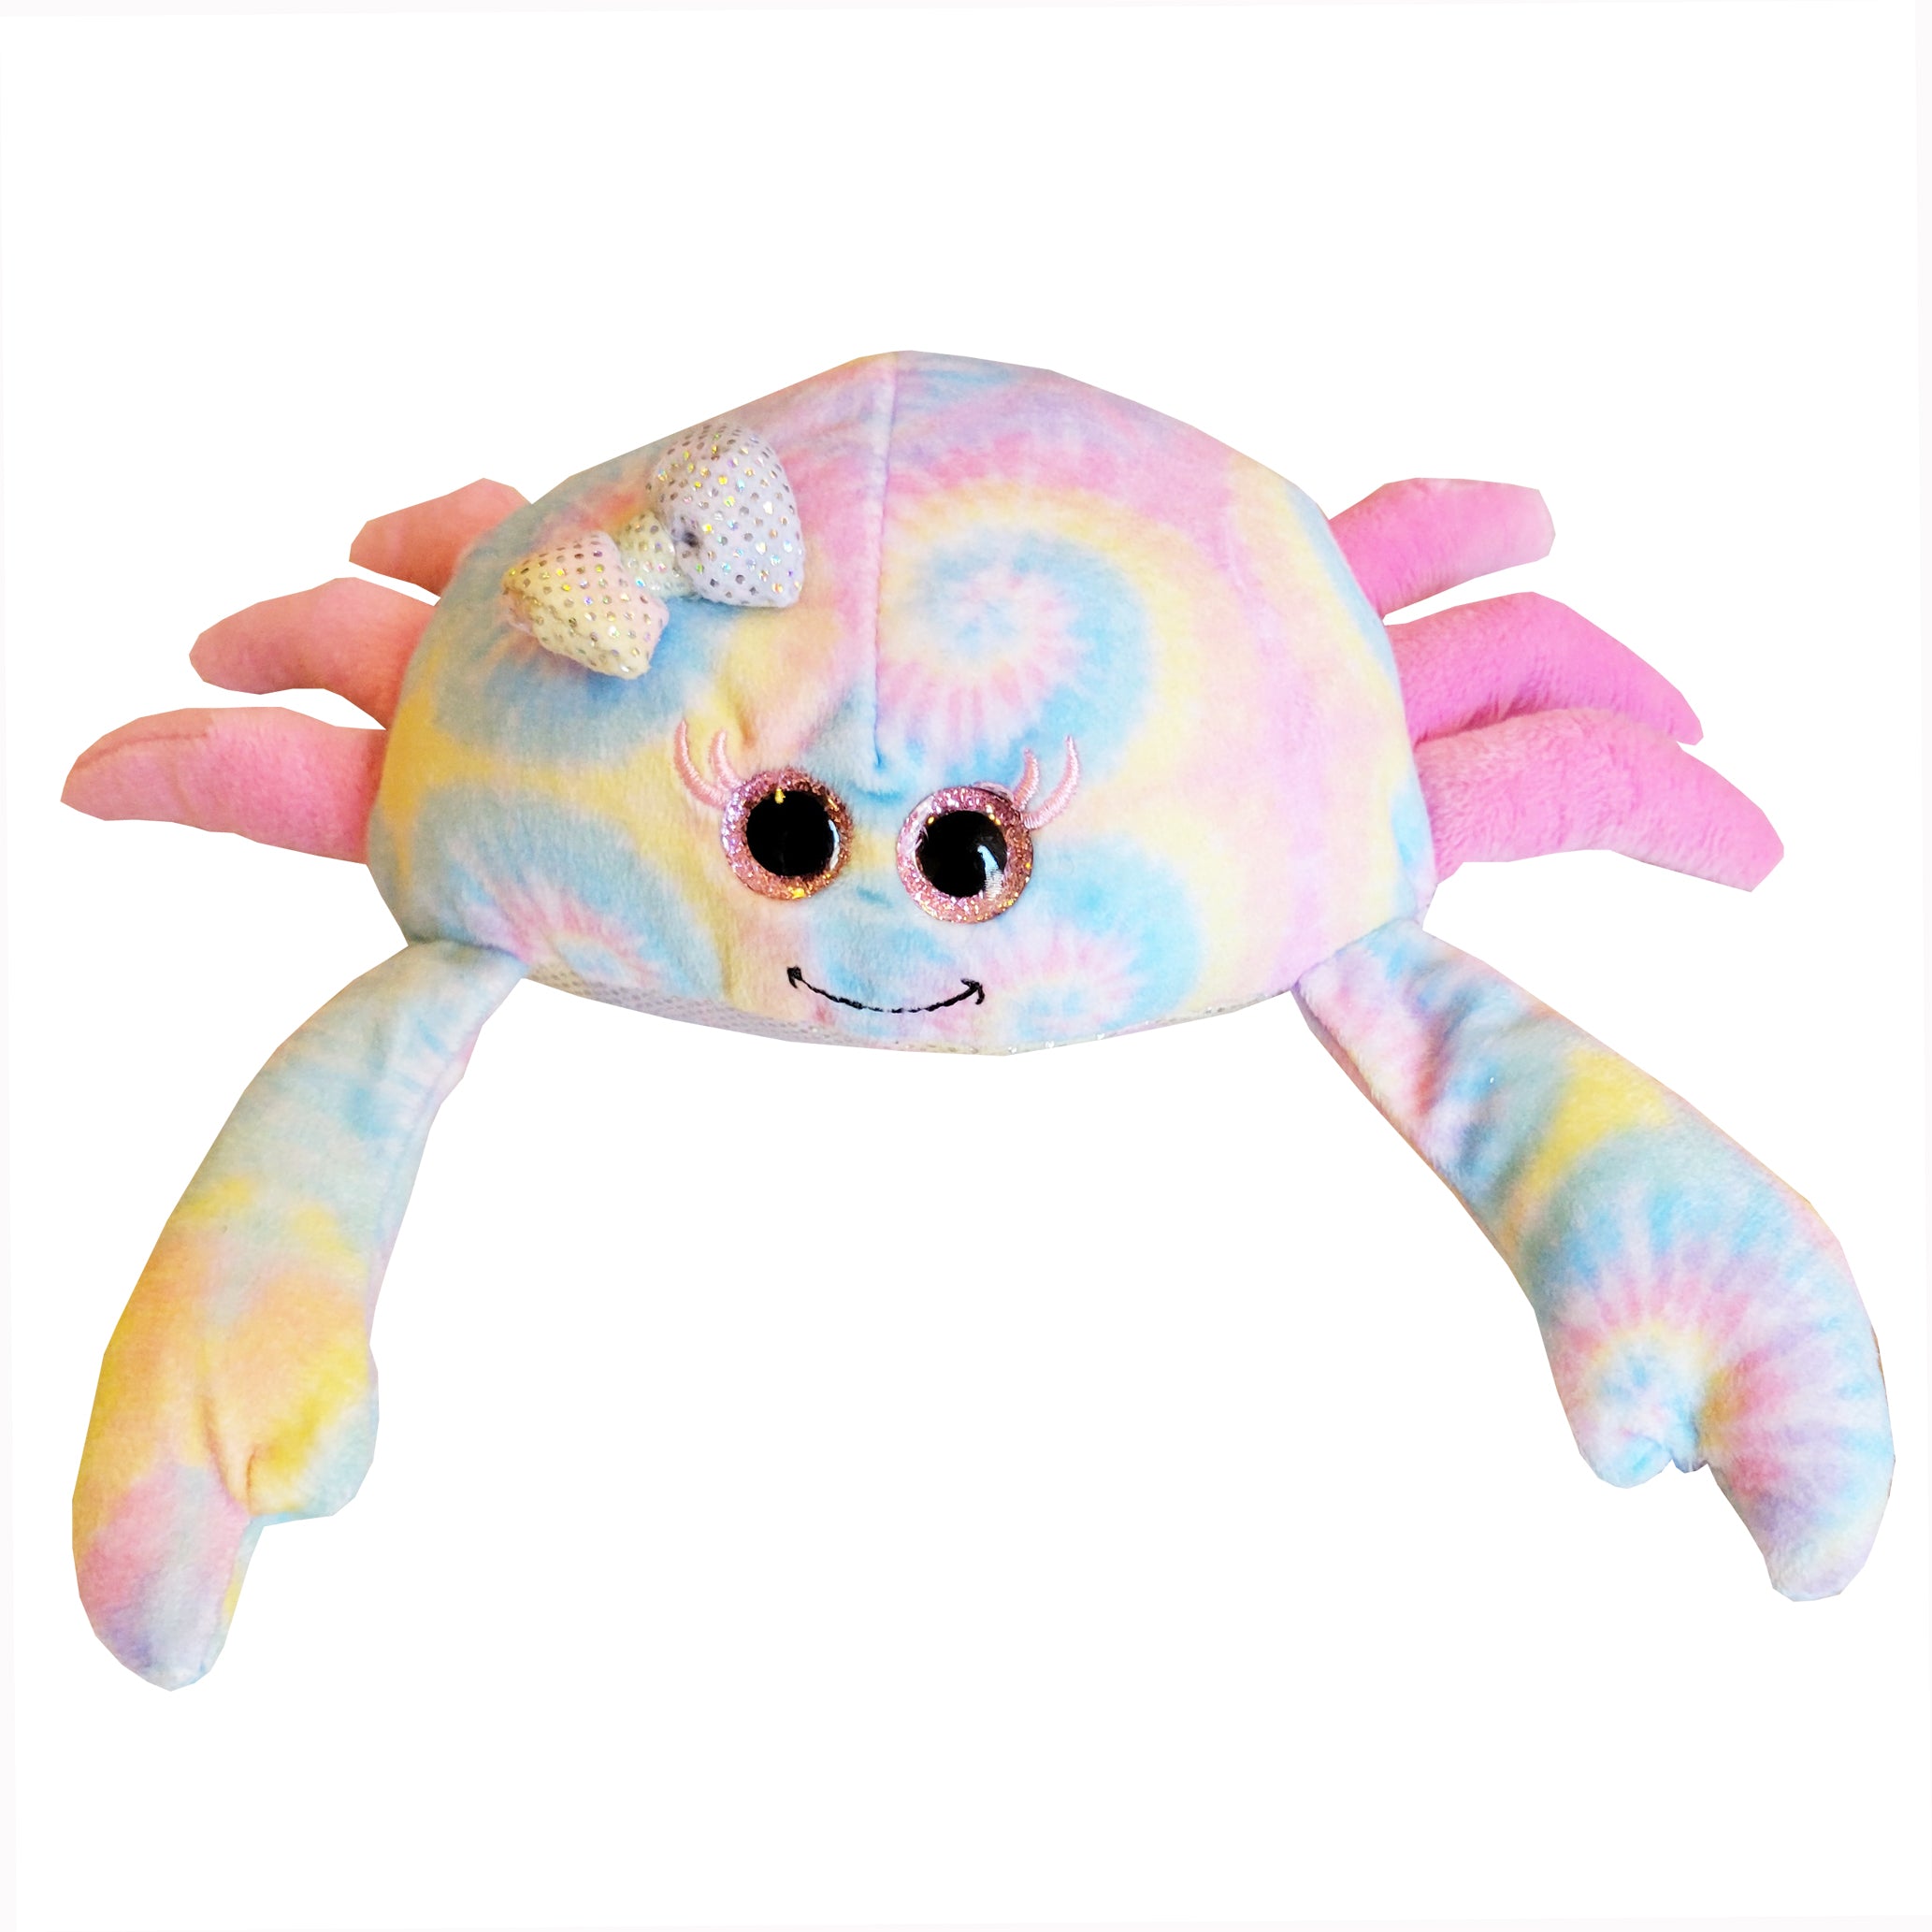 Crab Stuffed Animal, Gifts for Kids, Ocean Stuffed Animals, Casey Crab  Plush Toy, 12 inch (Bow Tie Party) (Aqua Green)